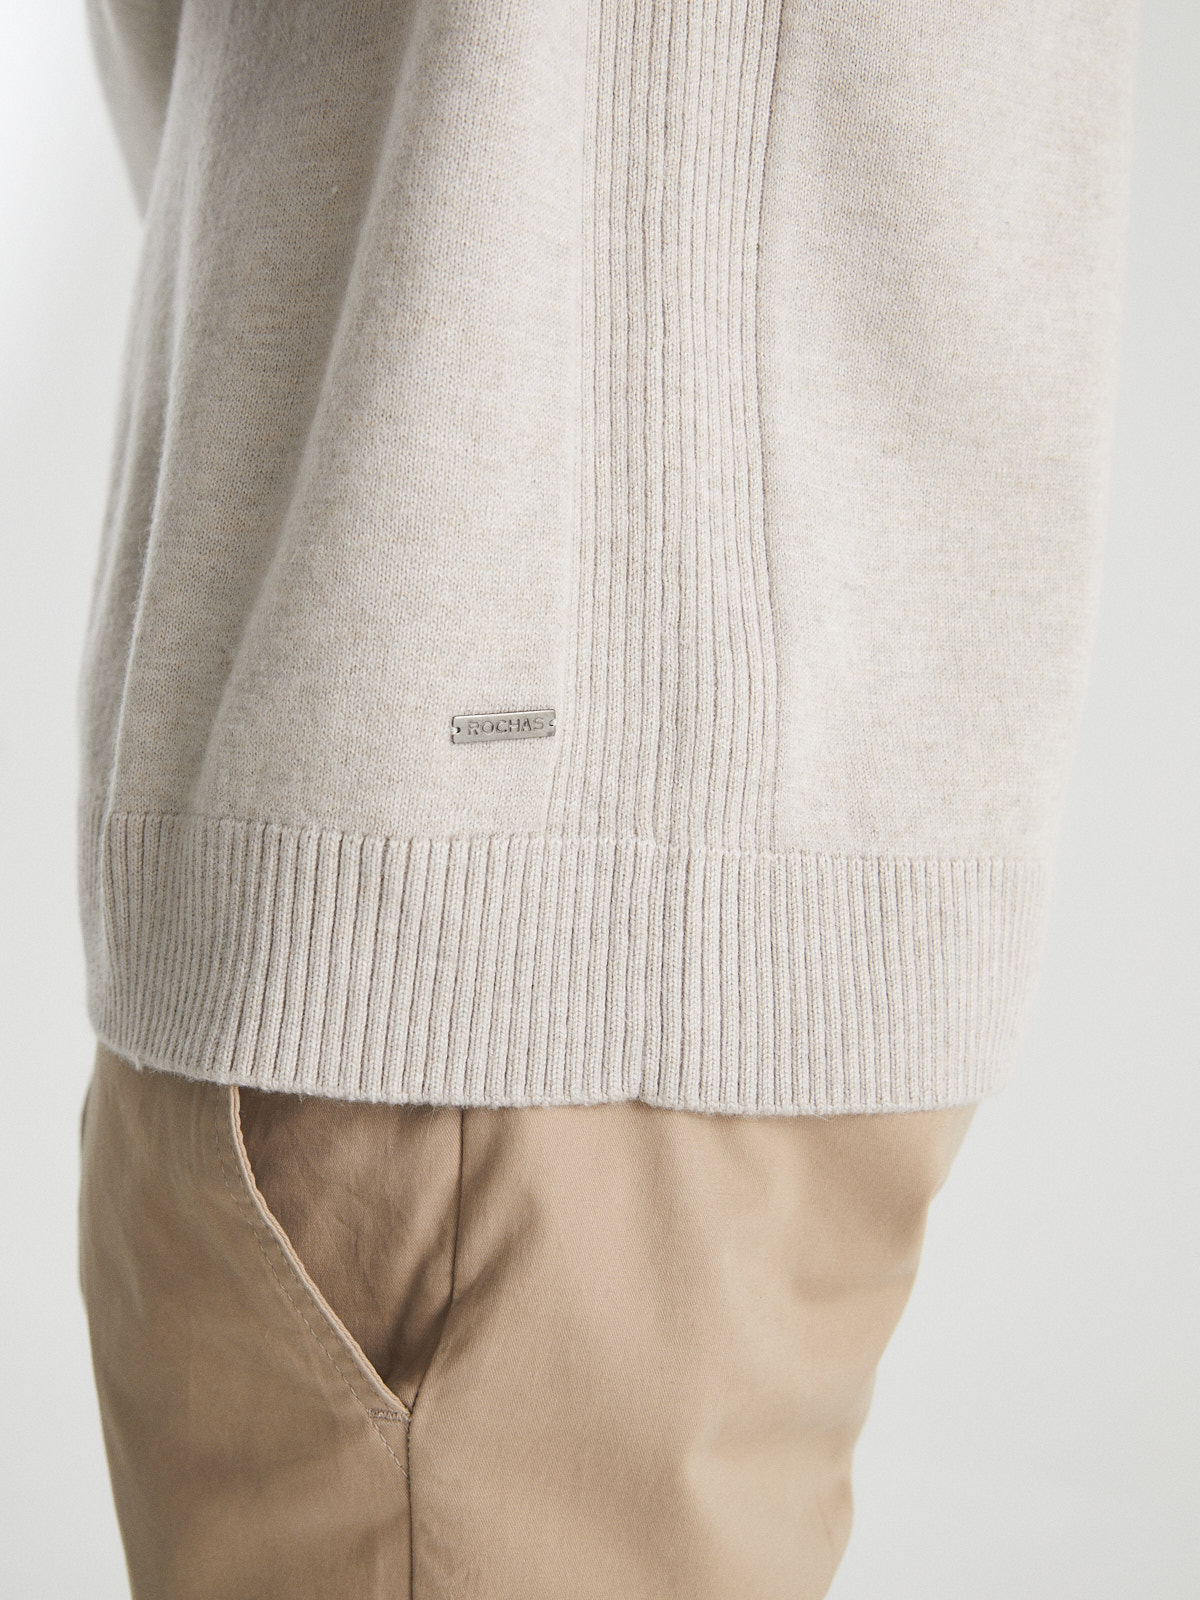 Rochas_Sweater_Trama_Lateral_natural_4.jpg